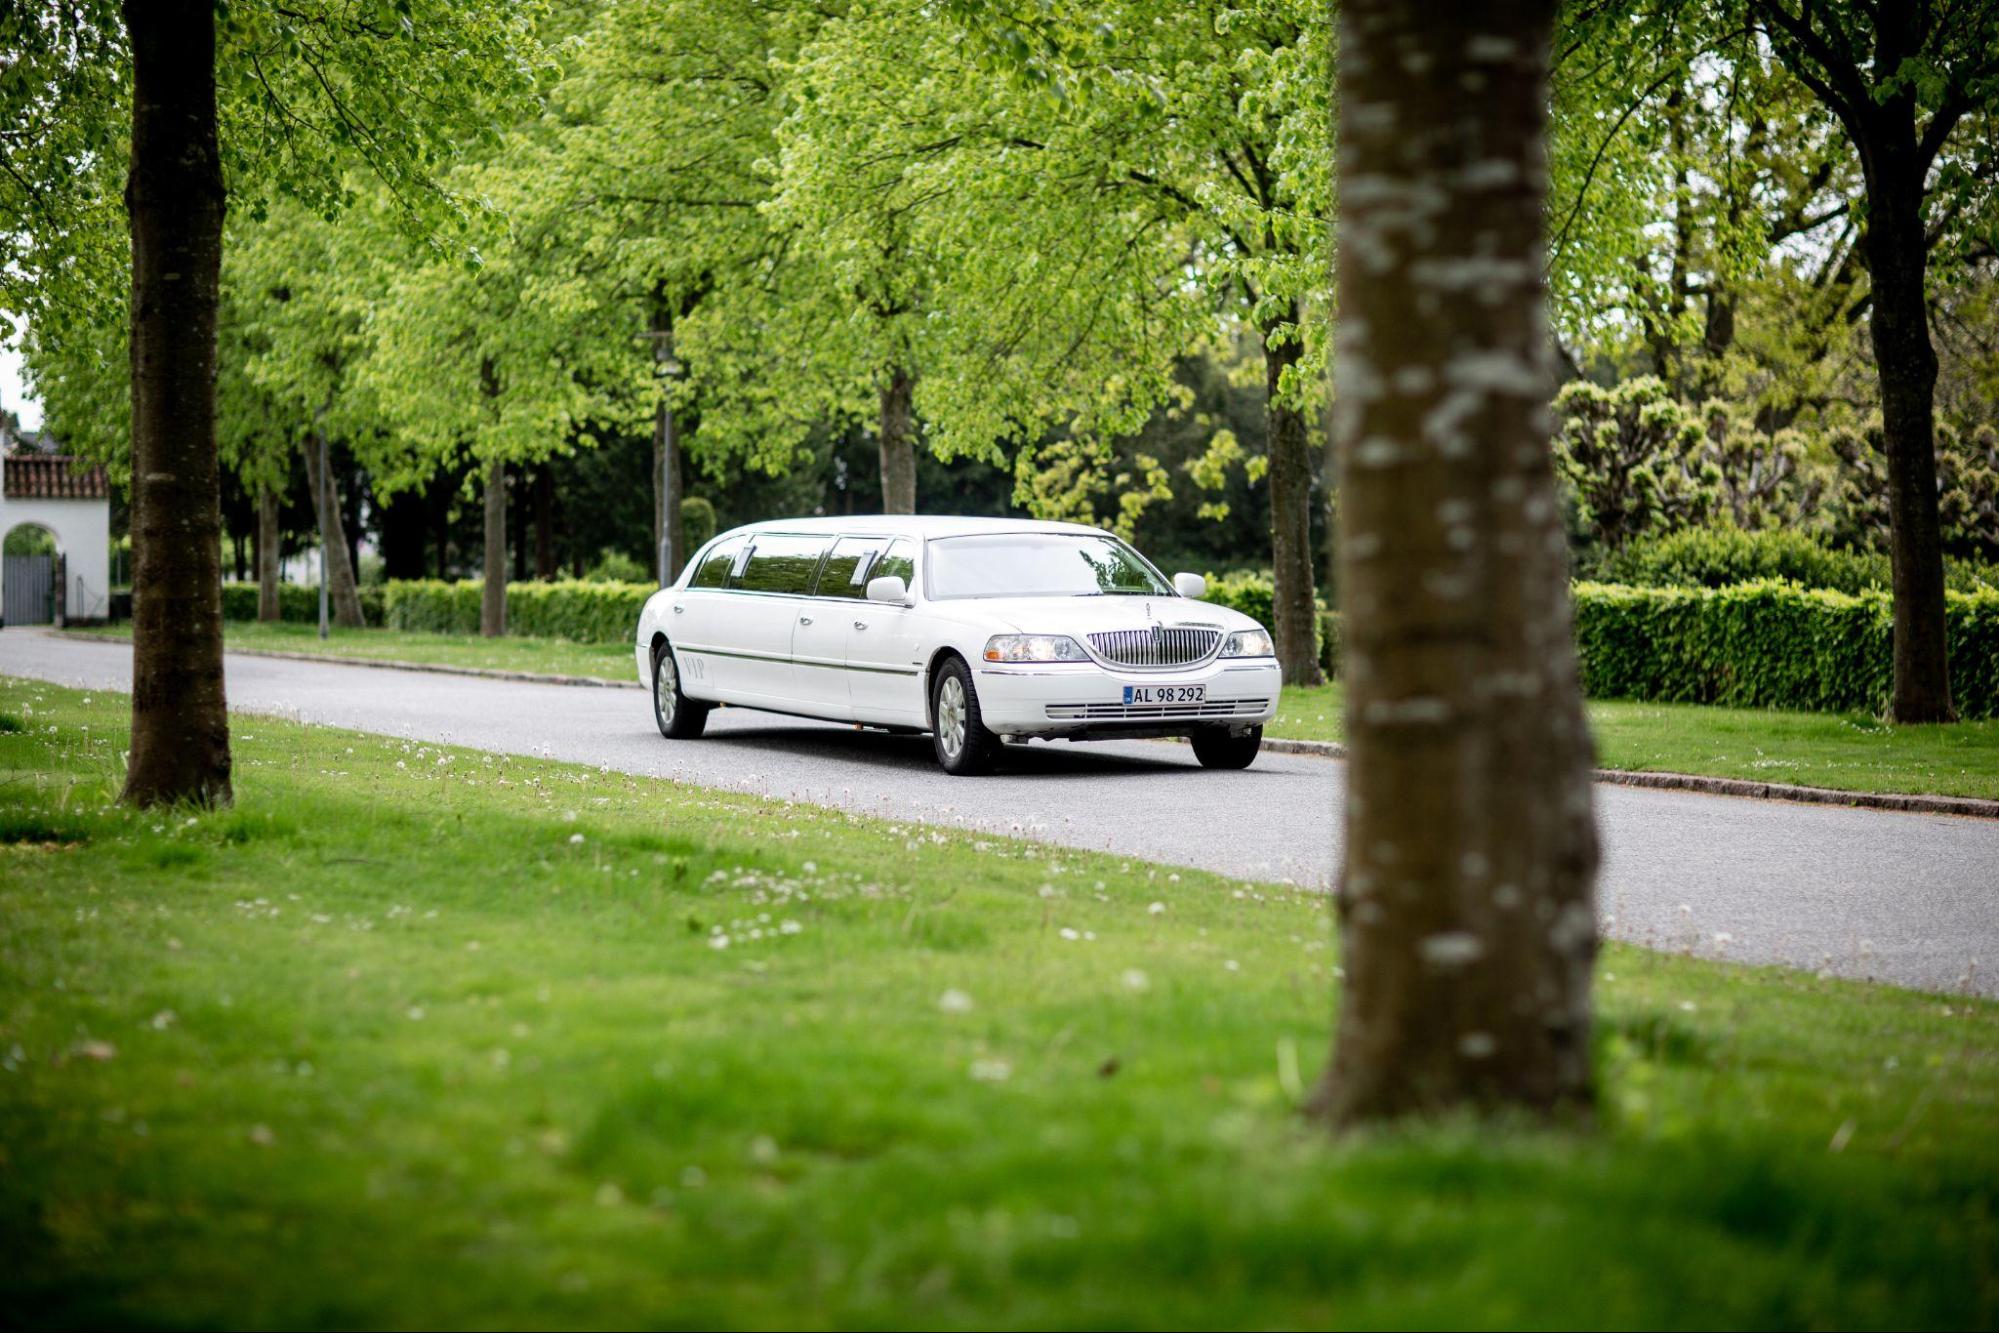 A white limo service car on a road